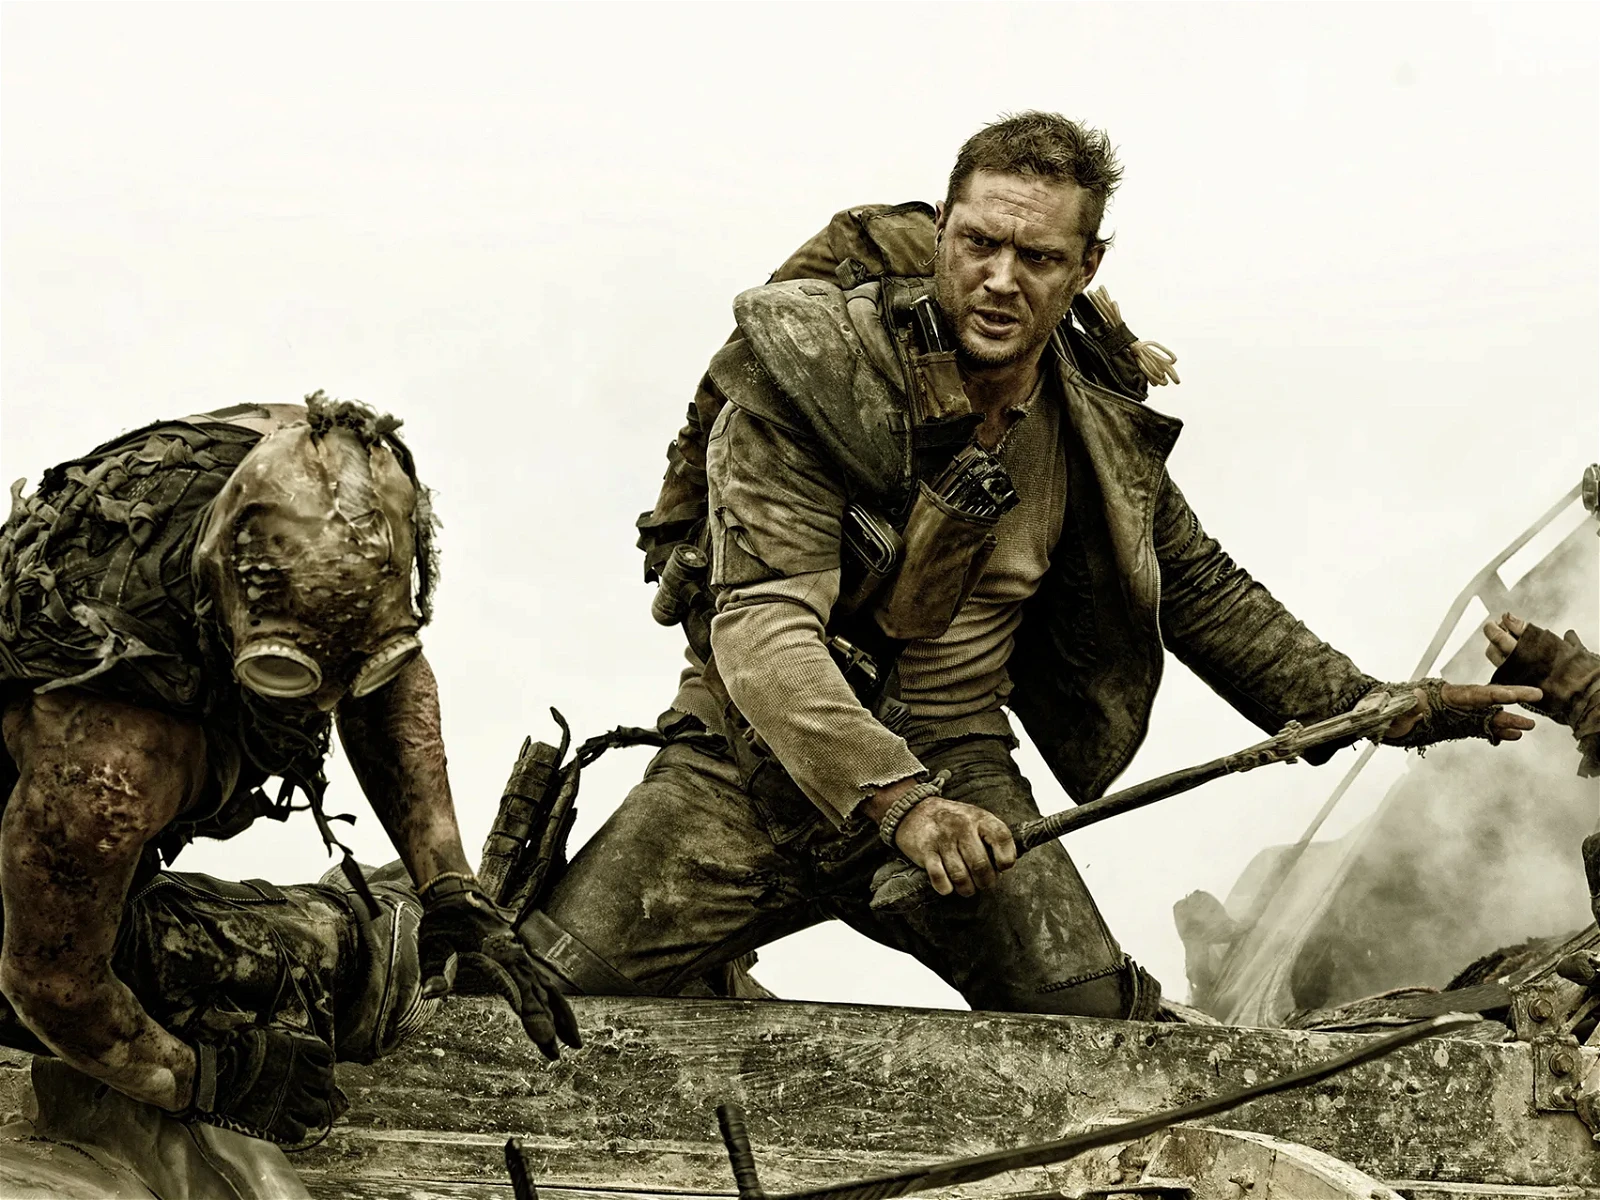 mad-max-fury-road-image-tom-hardy-5 - Trailers From Hell